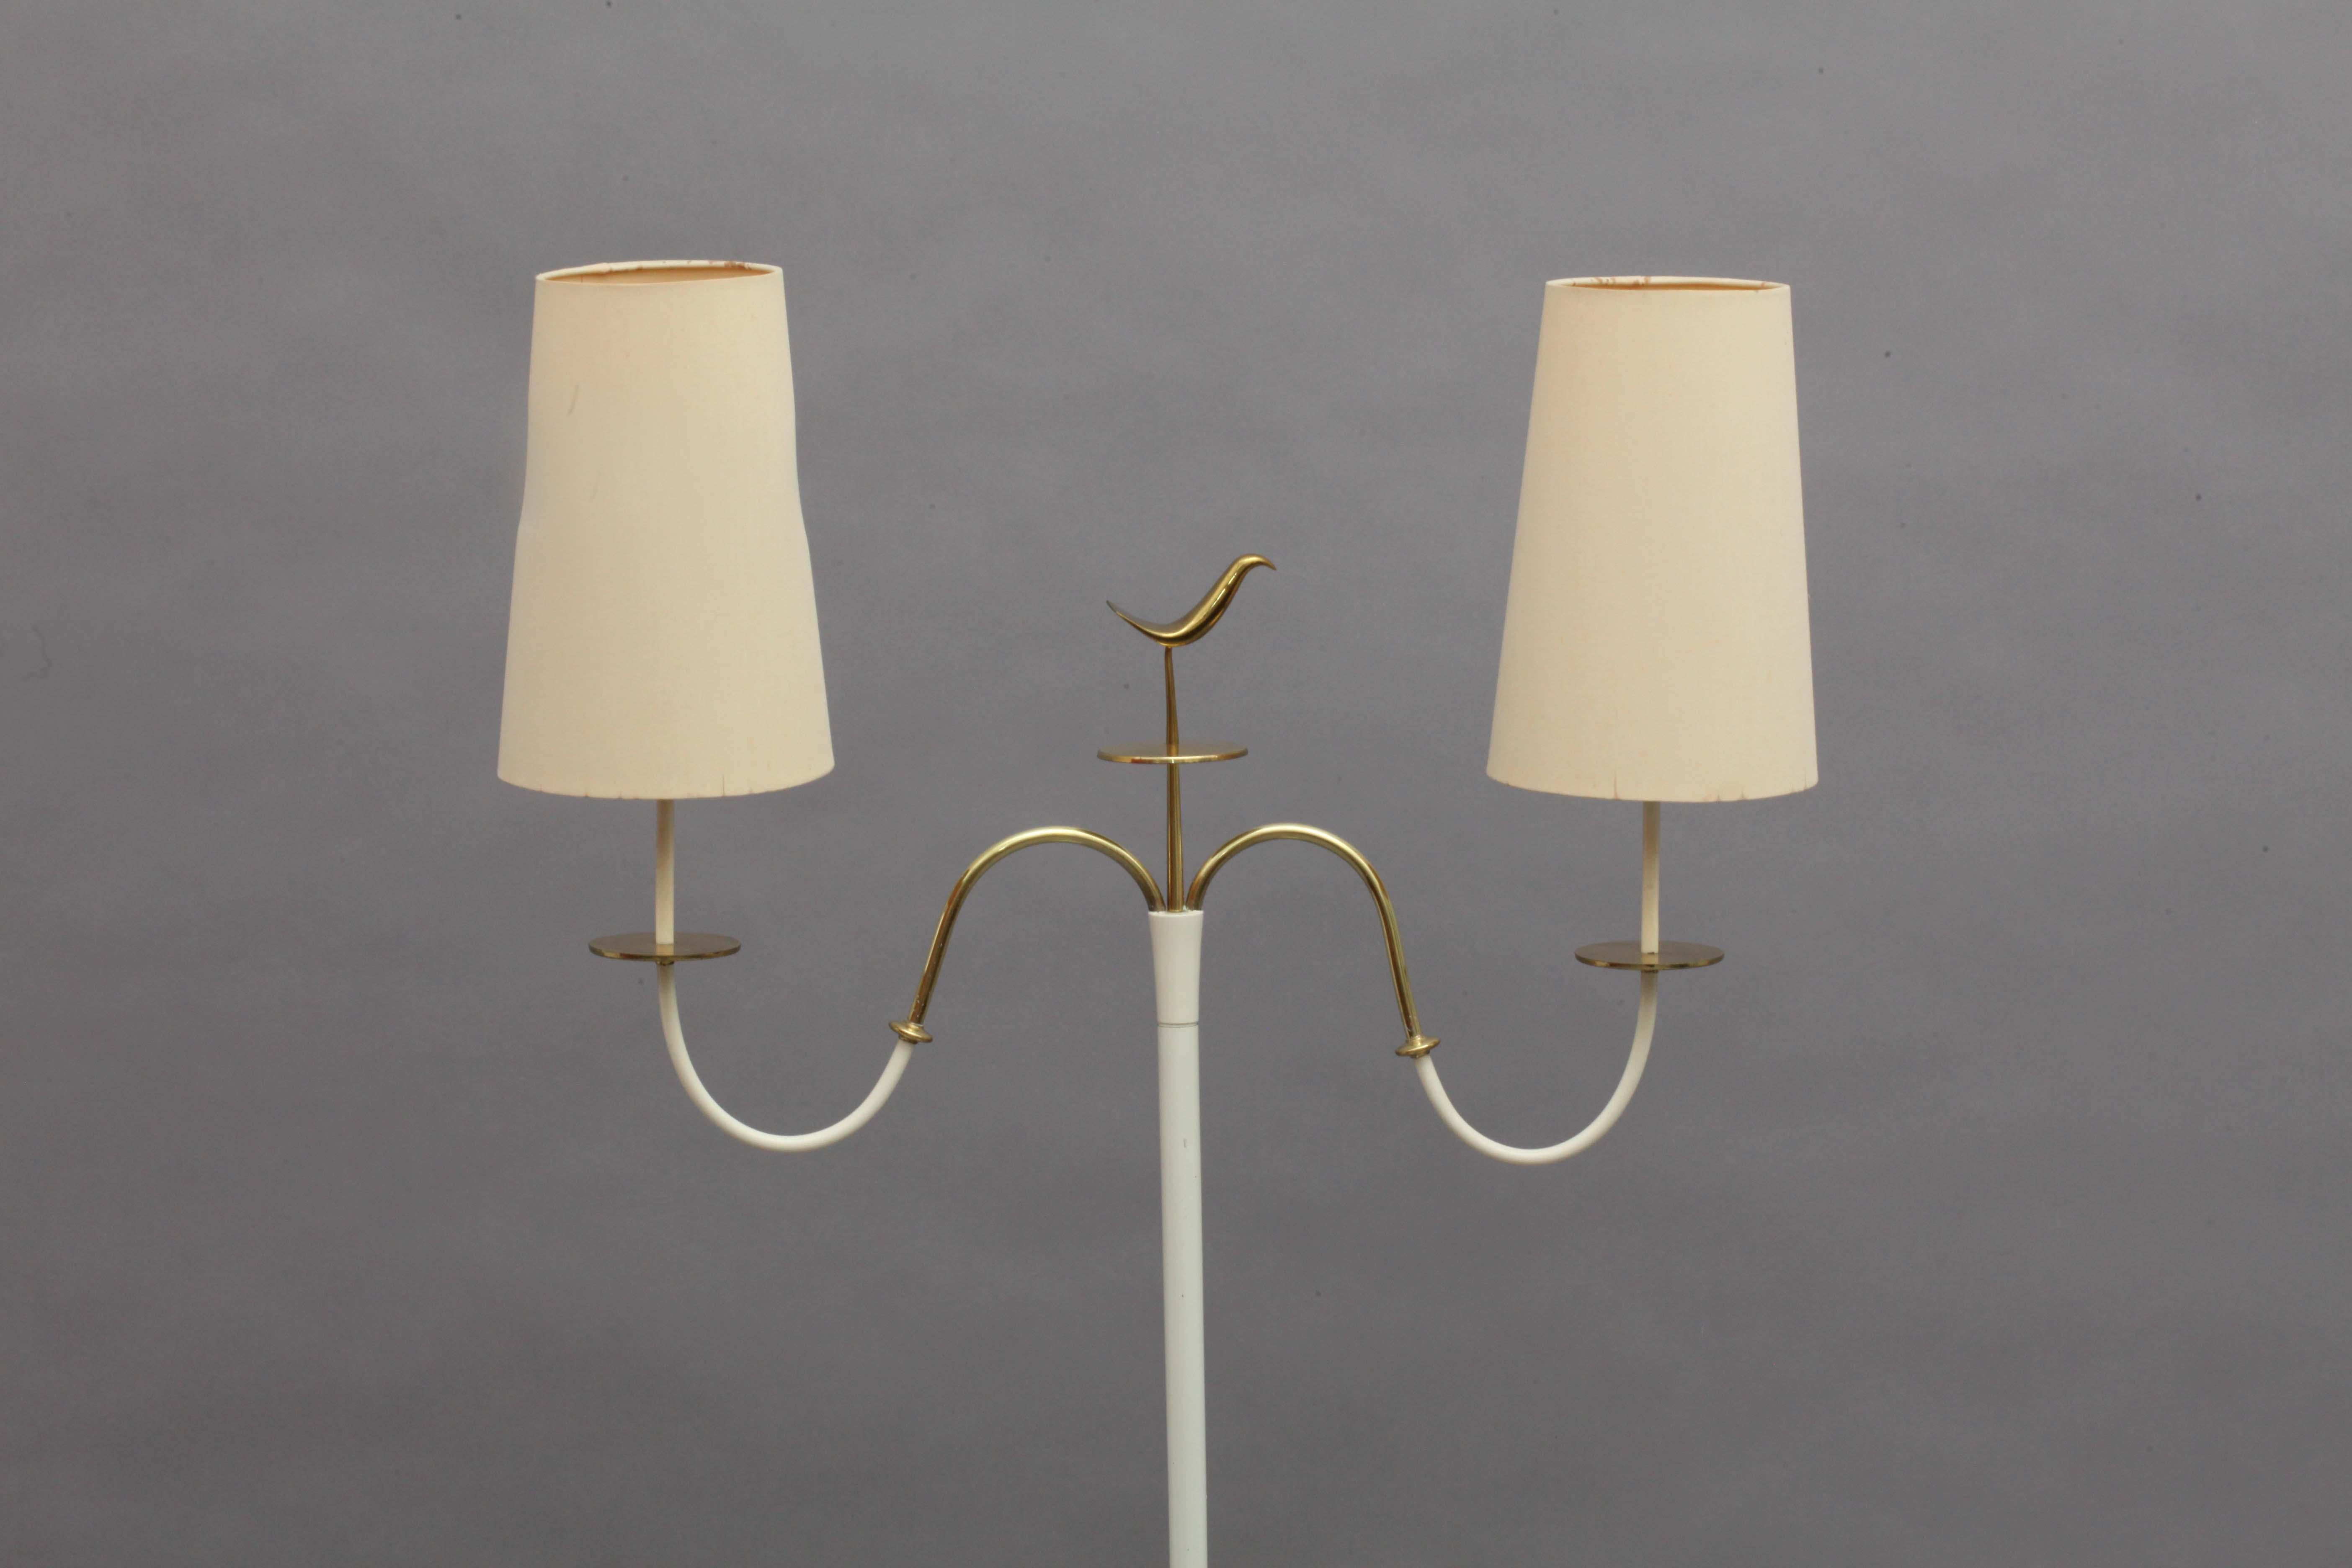 Floor lamp,
Münchner Werkstätten,
Germany 1950.
Brass base, two arms, two shades.